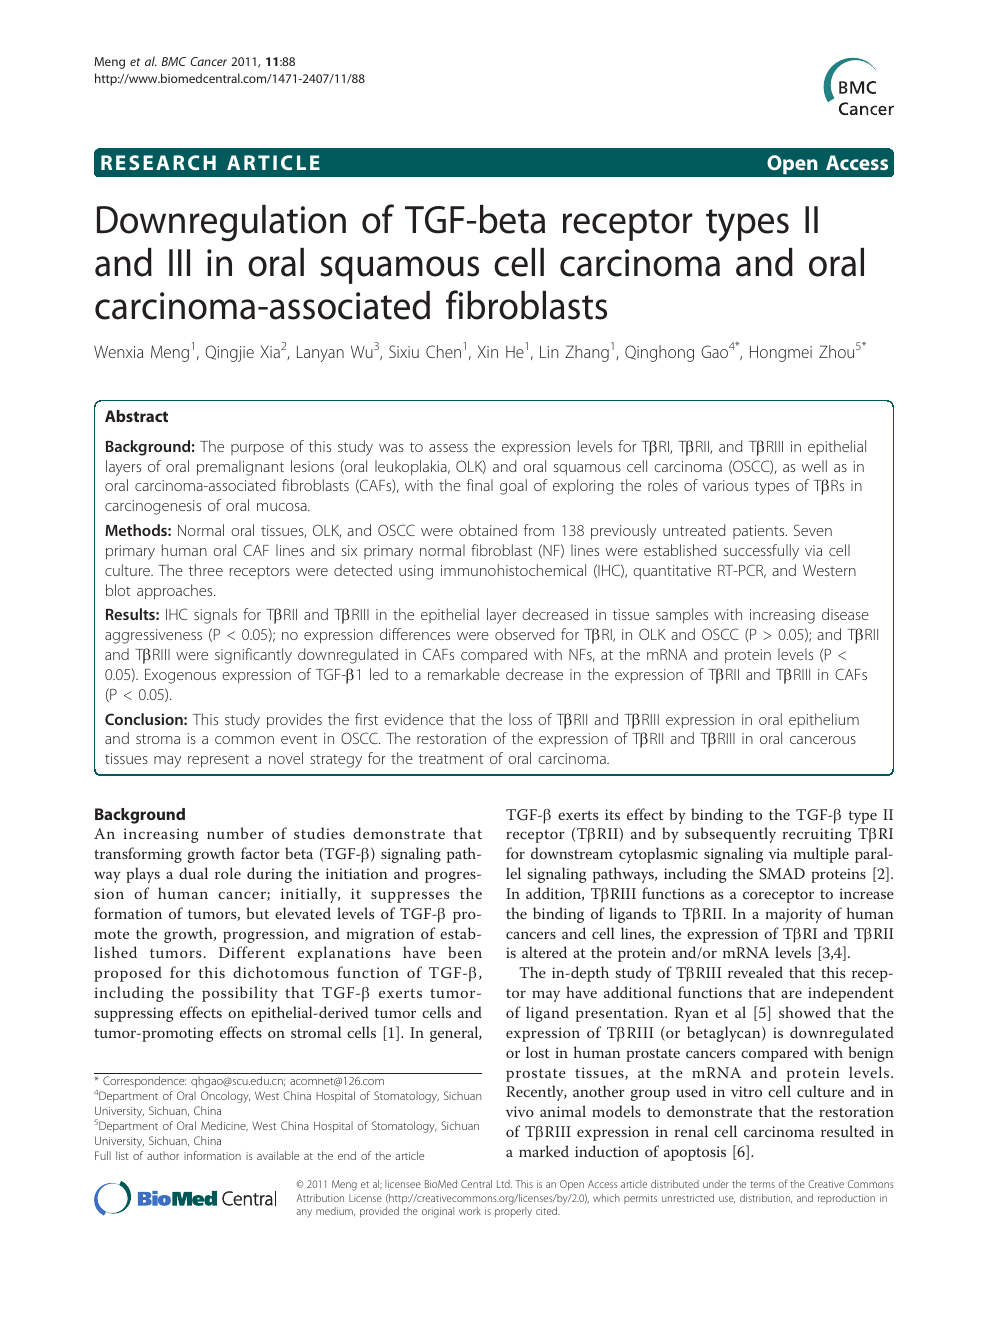 Downregulation Of Tgf Beta Receptor Types Ii And Iii In Oral Squamous Cell Carcinoma And Oral Carcinoma Associated Fibroblasts Topic Of Research Paper In Biological Sciences Download Scholarly Article Pdf And Read For